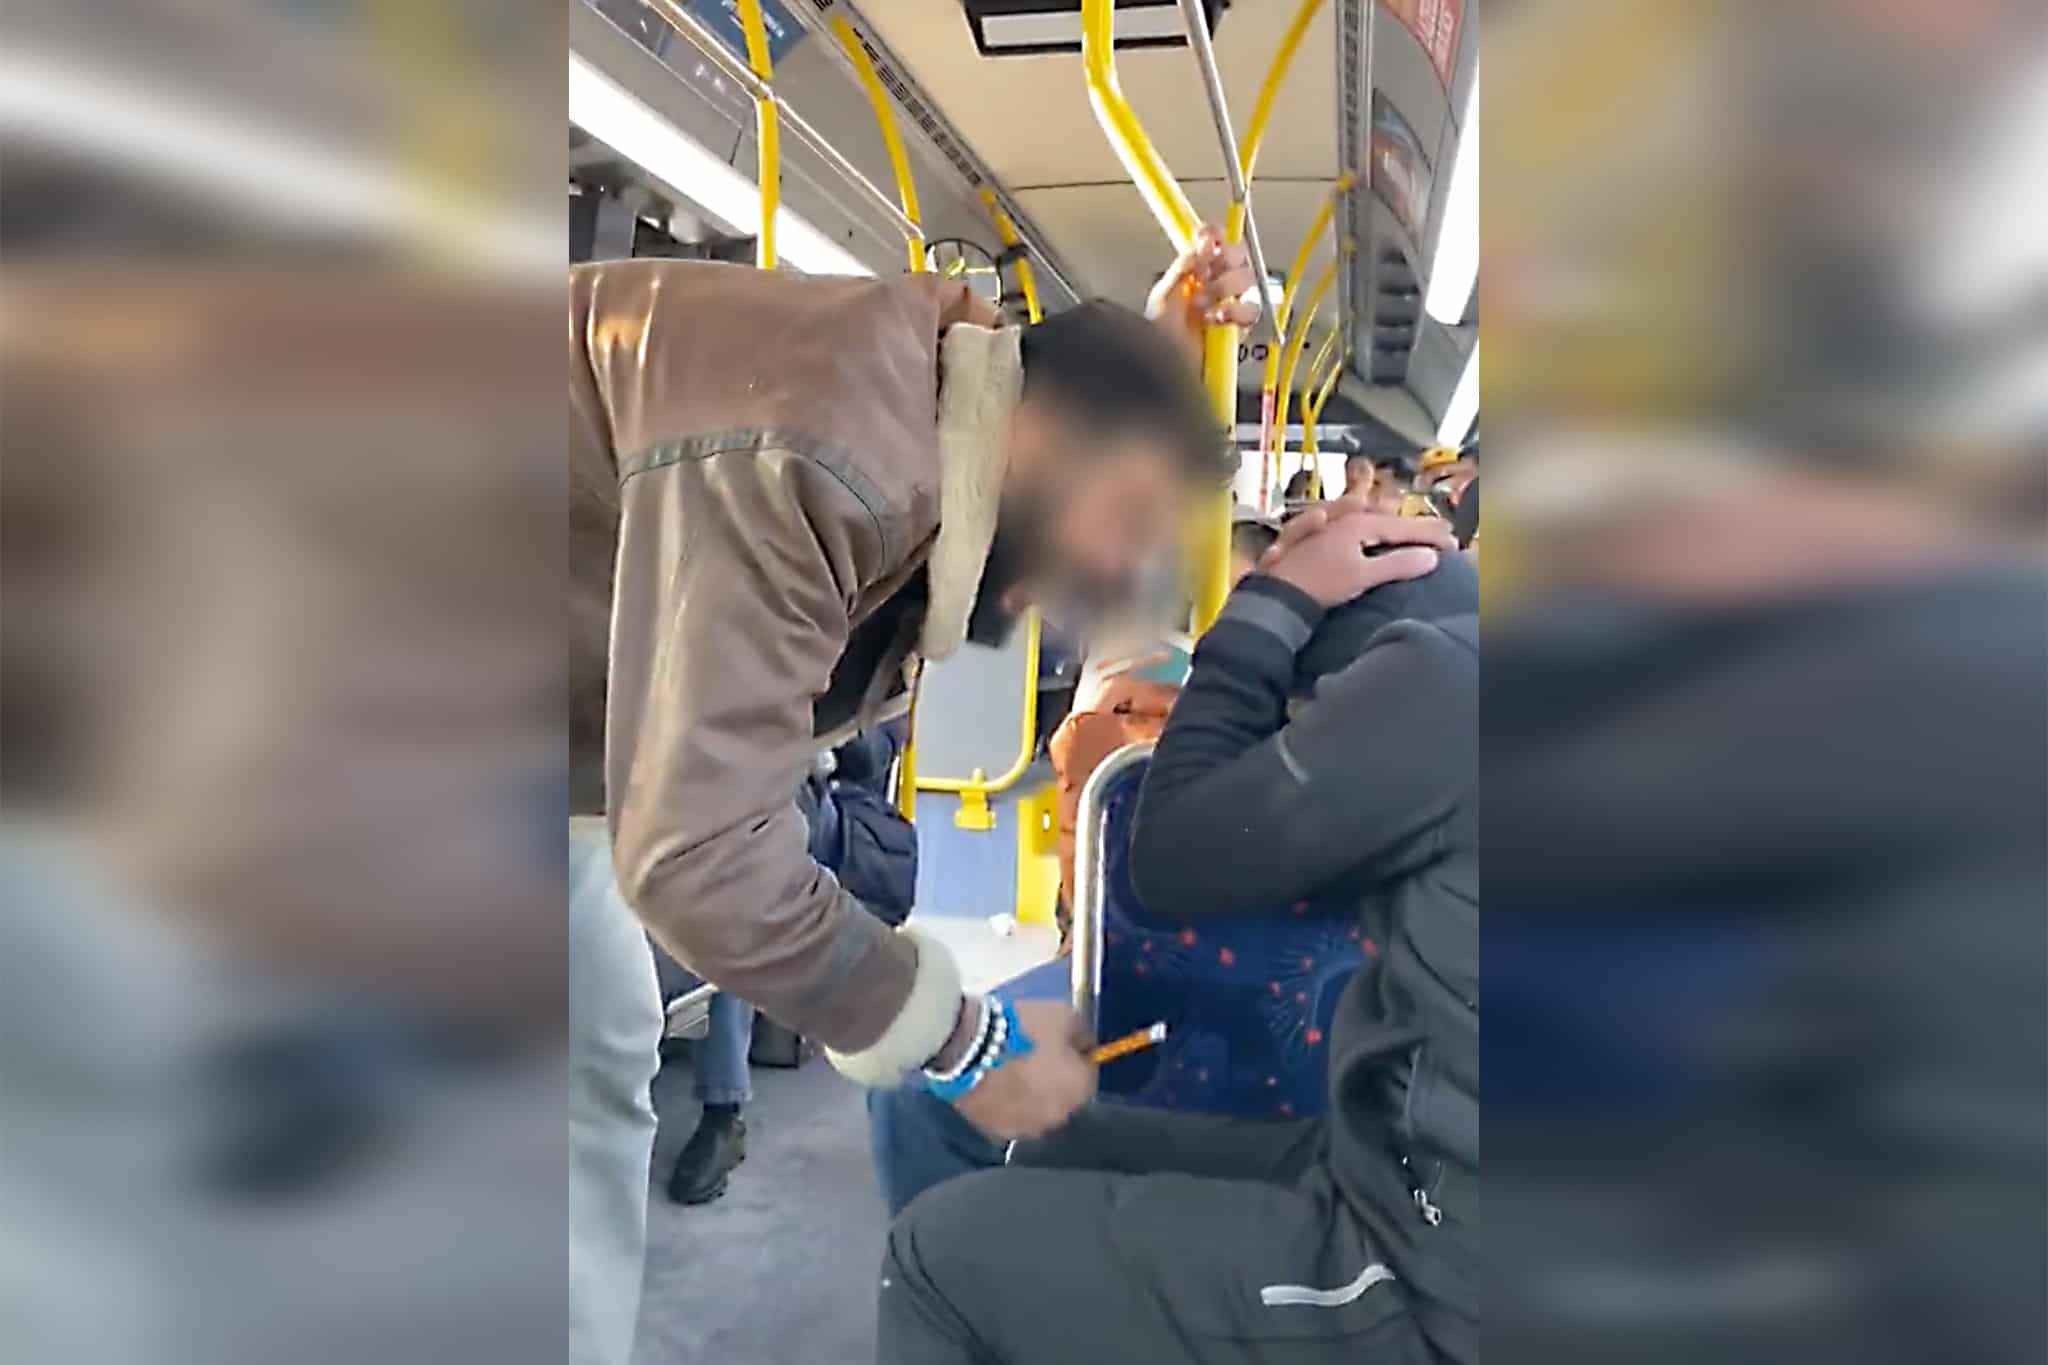 attack on mississauga bus